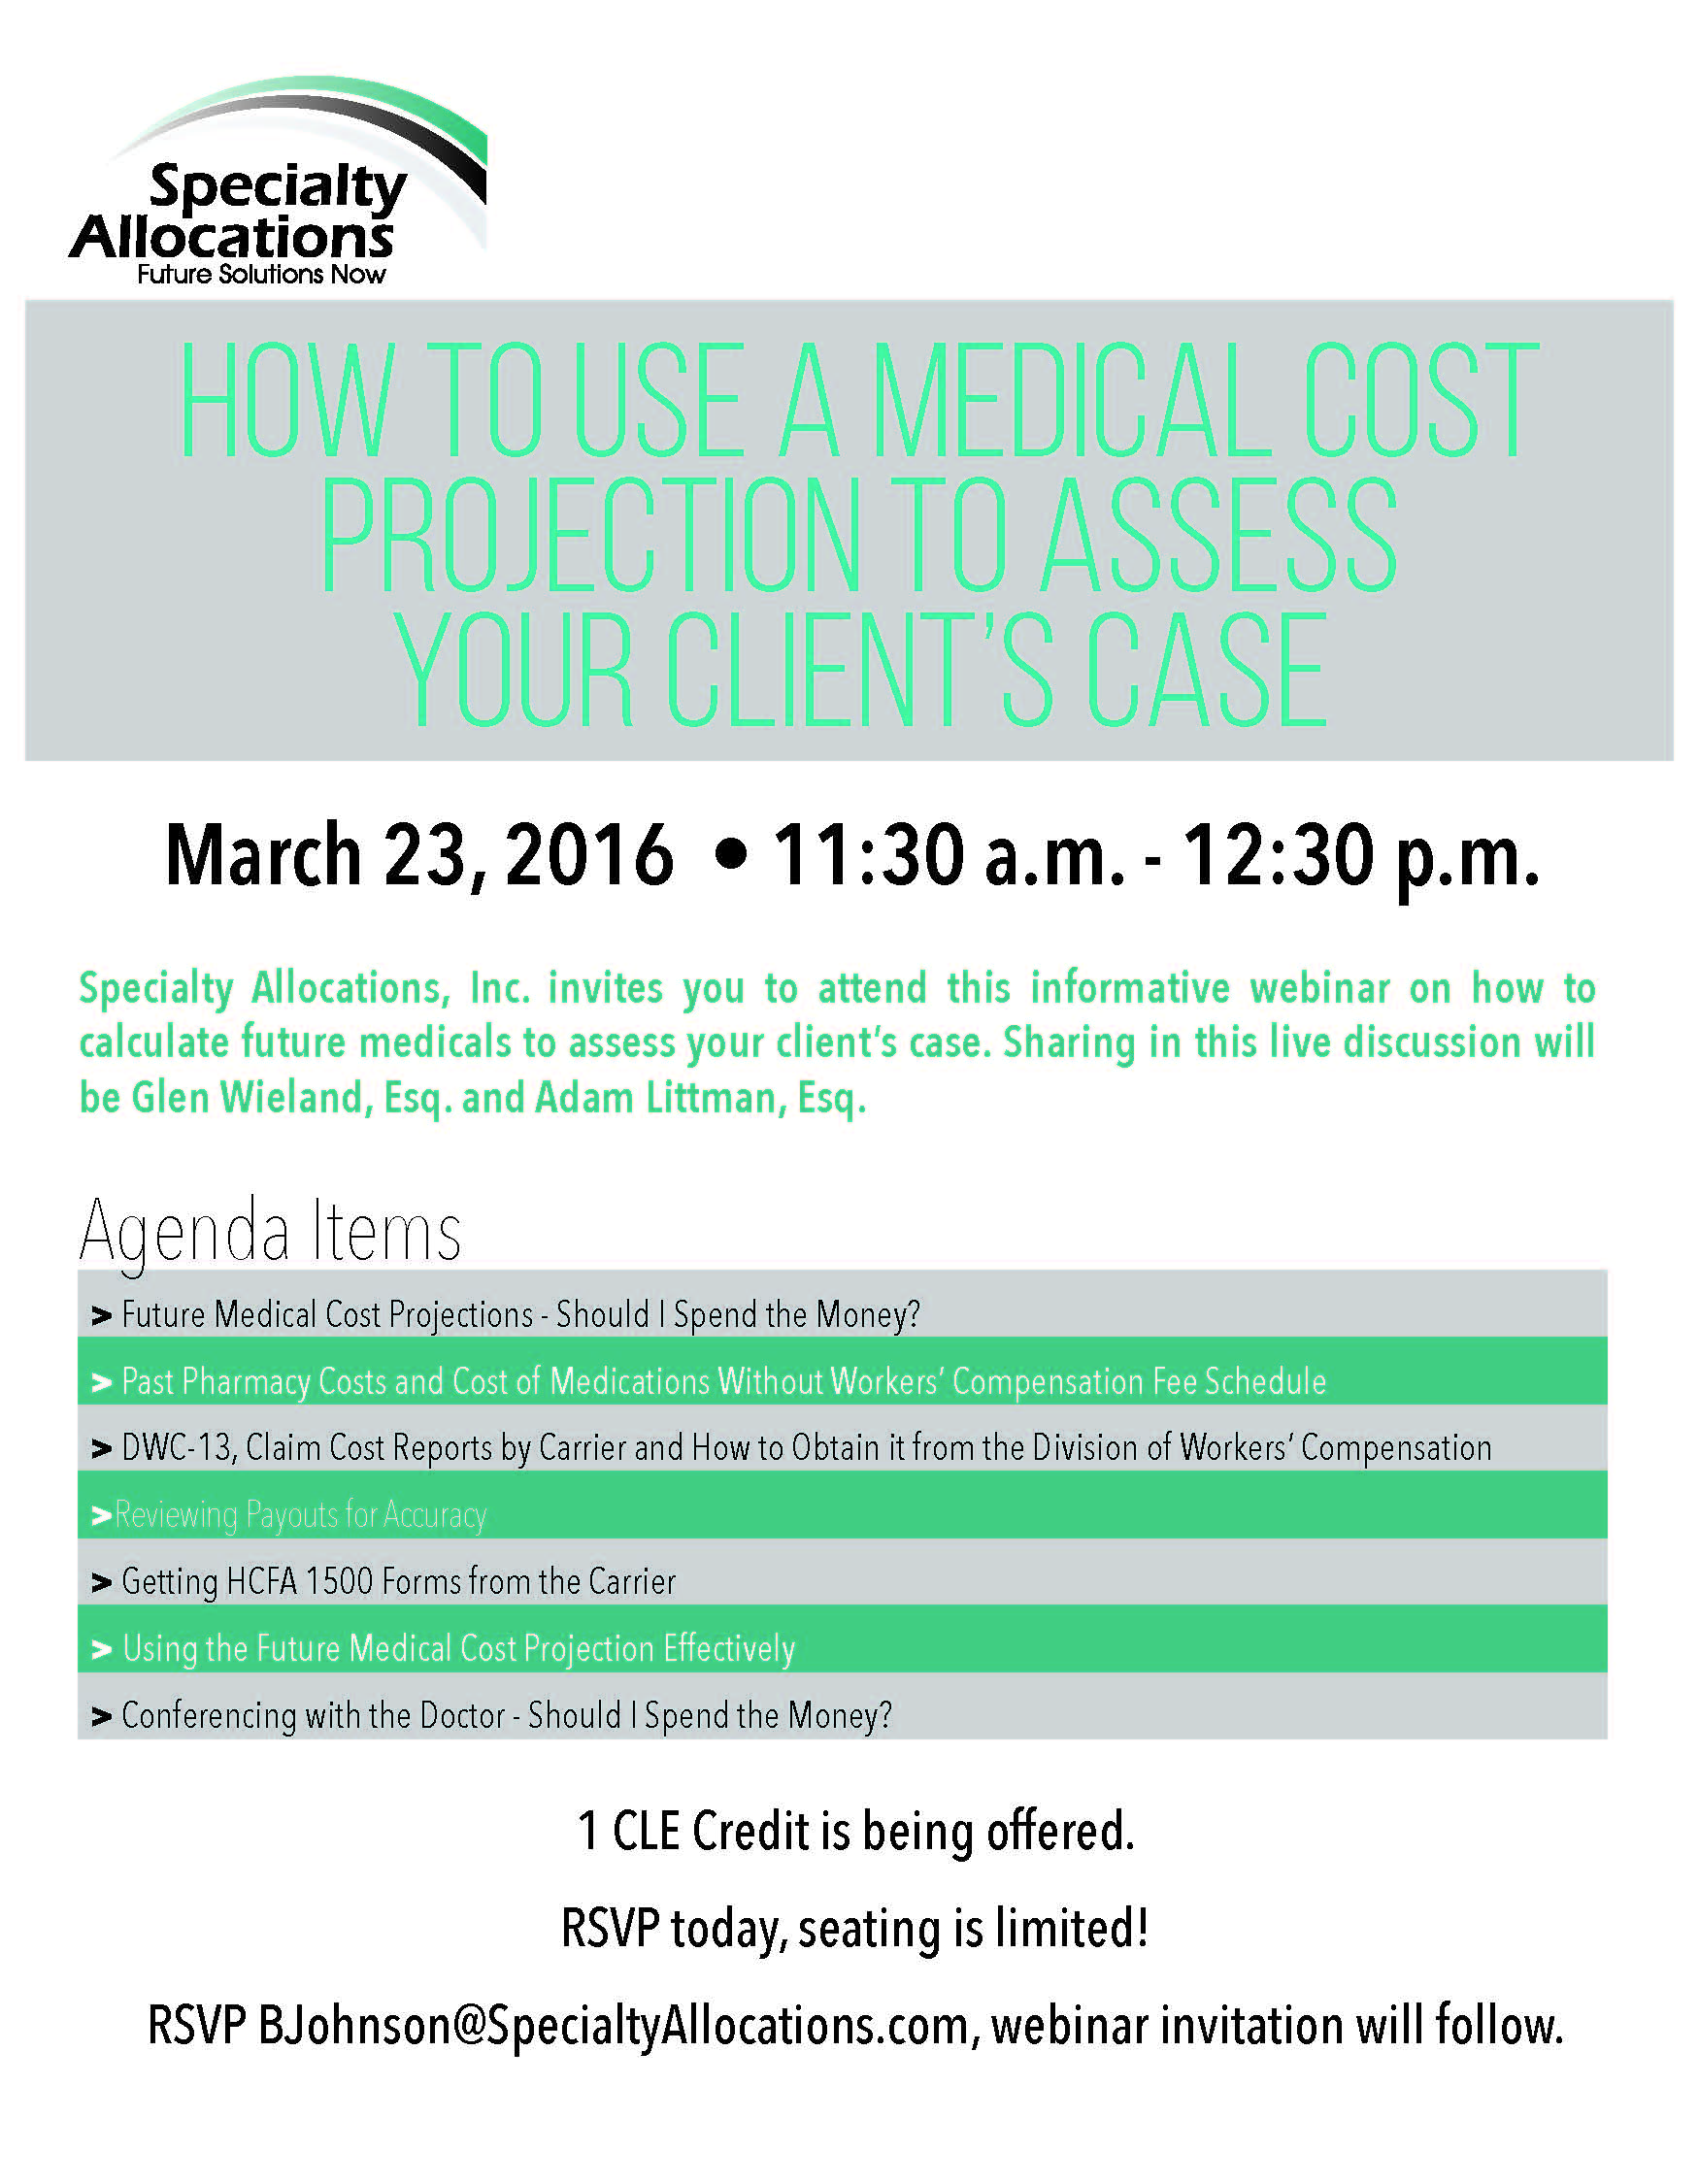 how to use a Medical Cost Projection to assess your Client’s Case